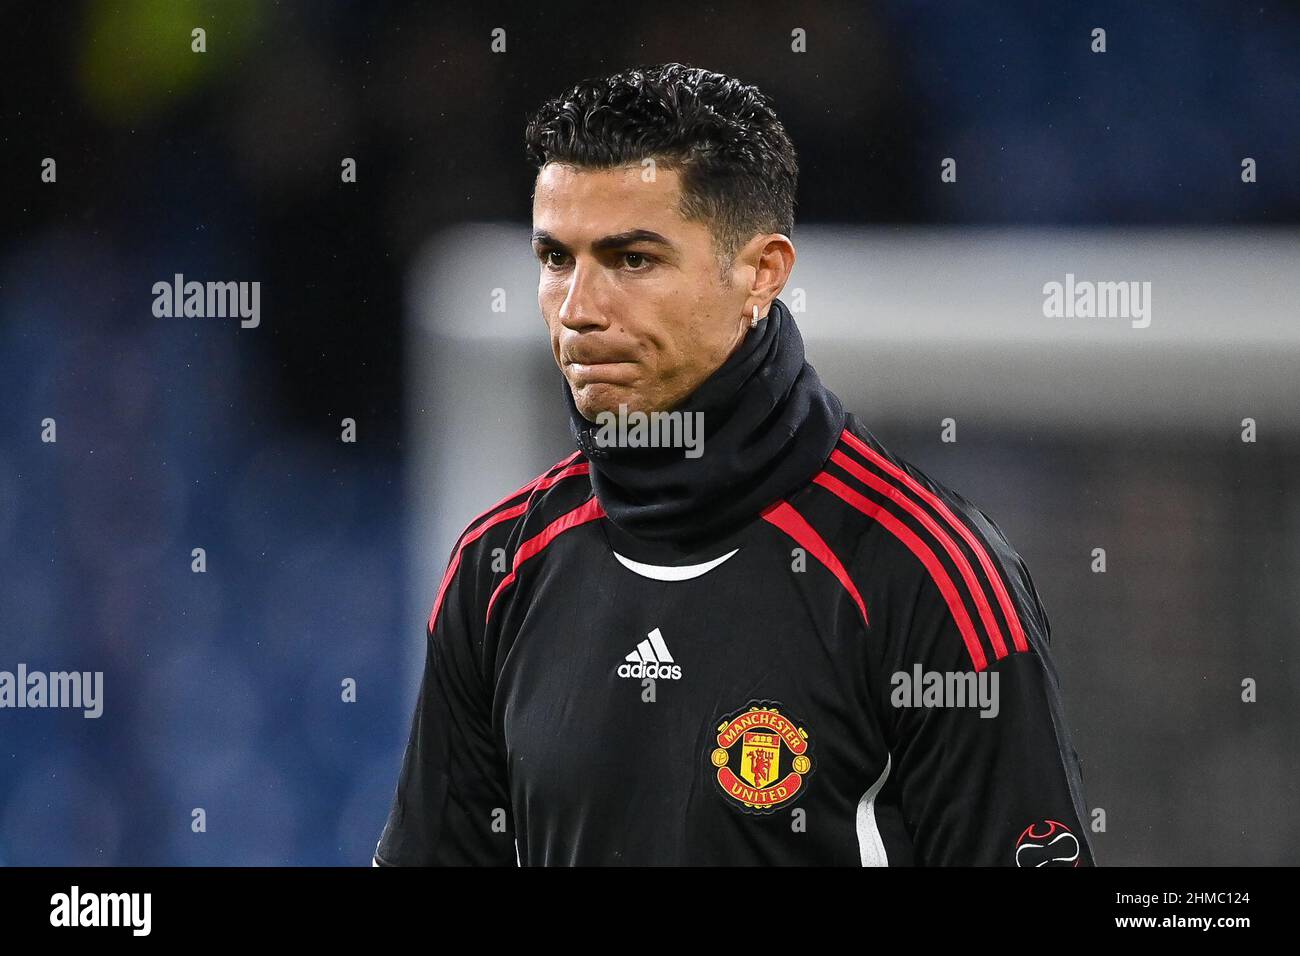 Cristiano Ronaldo #7 of Manchester United during the pre-game warmup Stock Photo